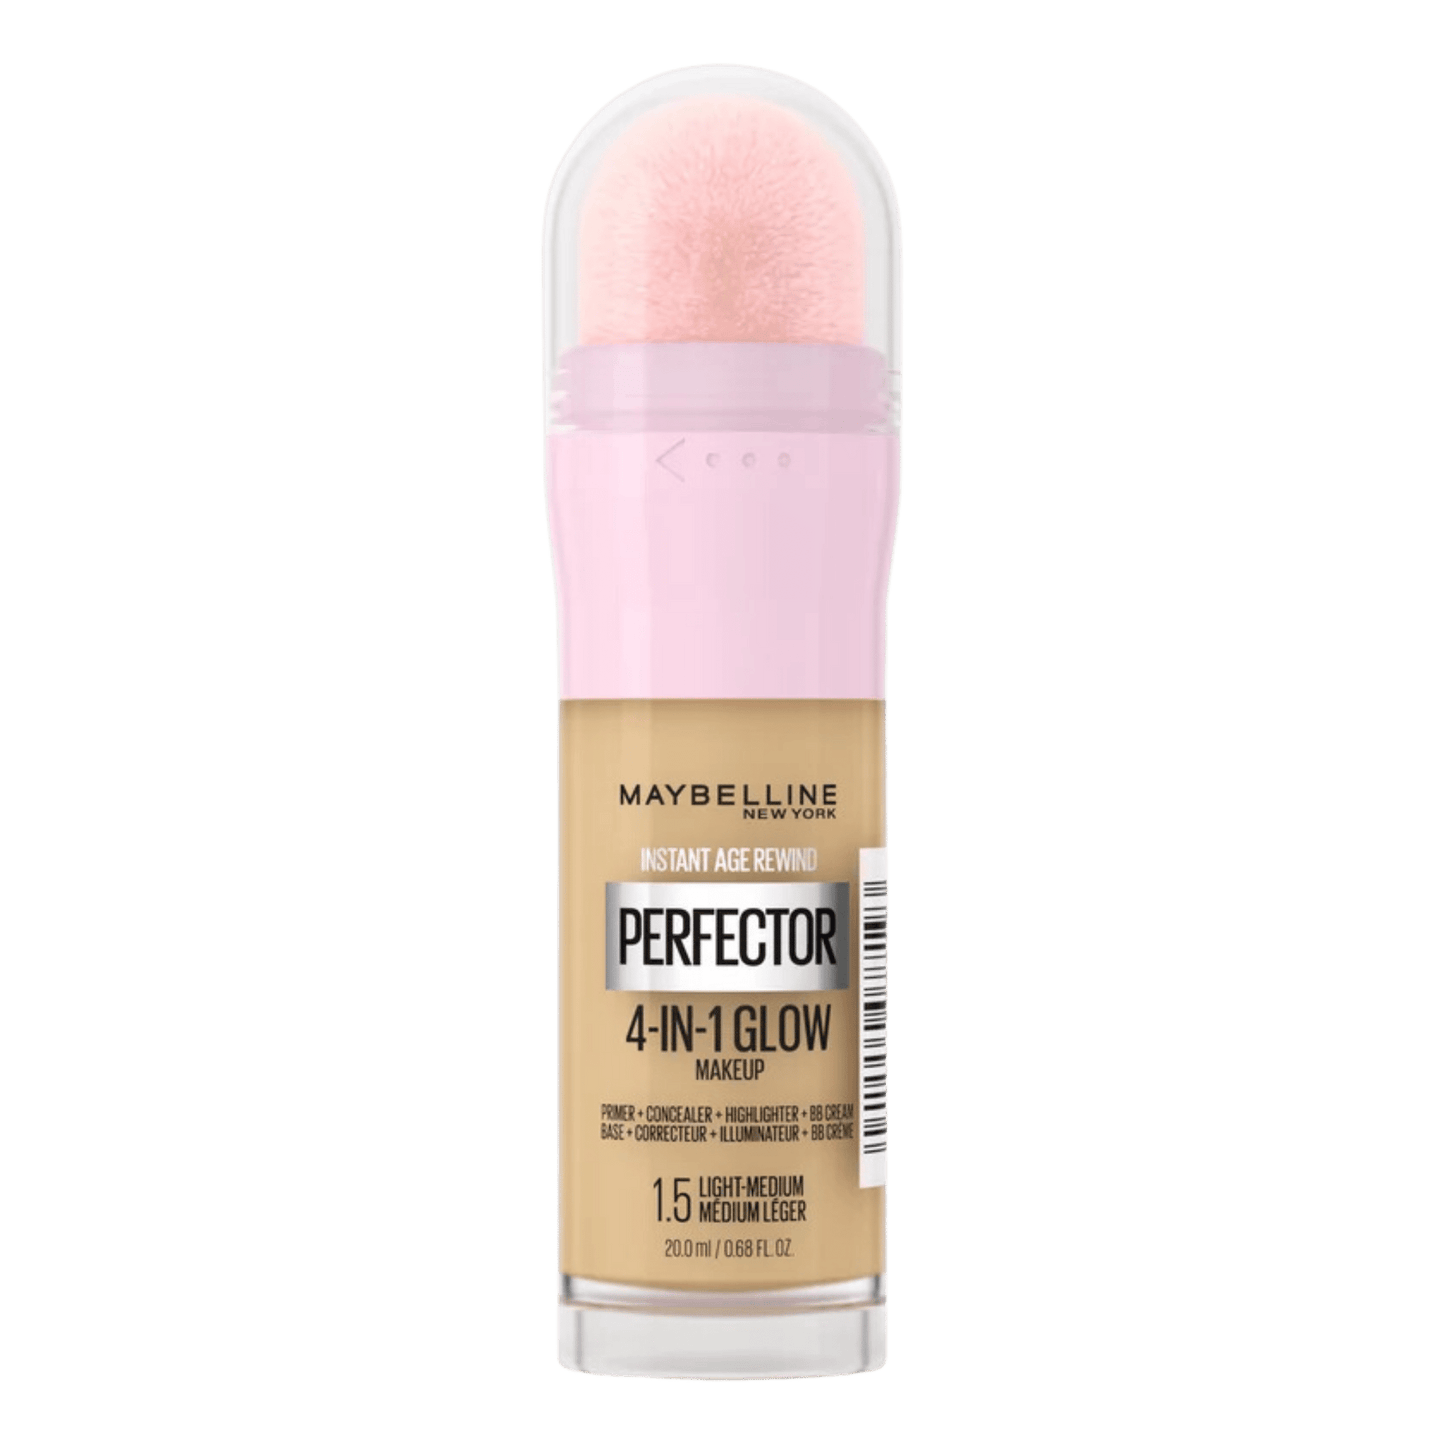 Maybelline Instant Age Rewind Perfector 4-in-1 Glow (20ml)